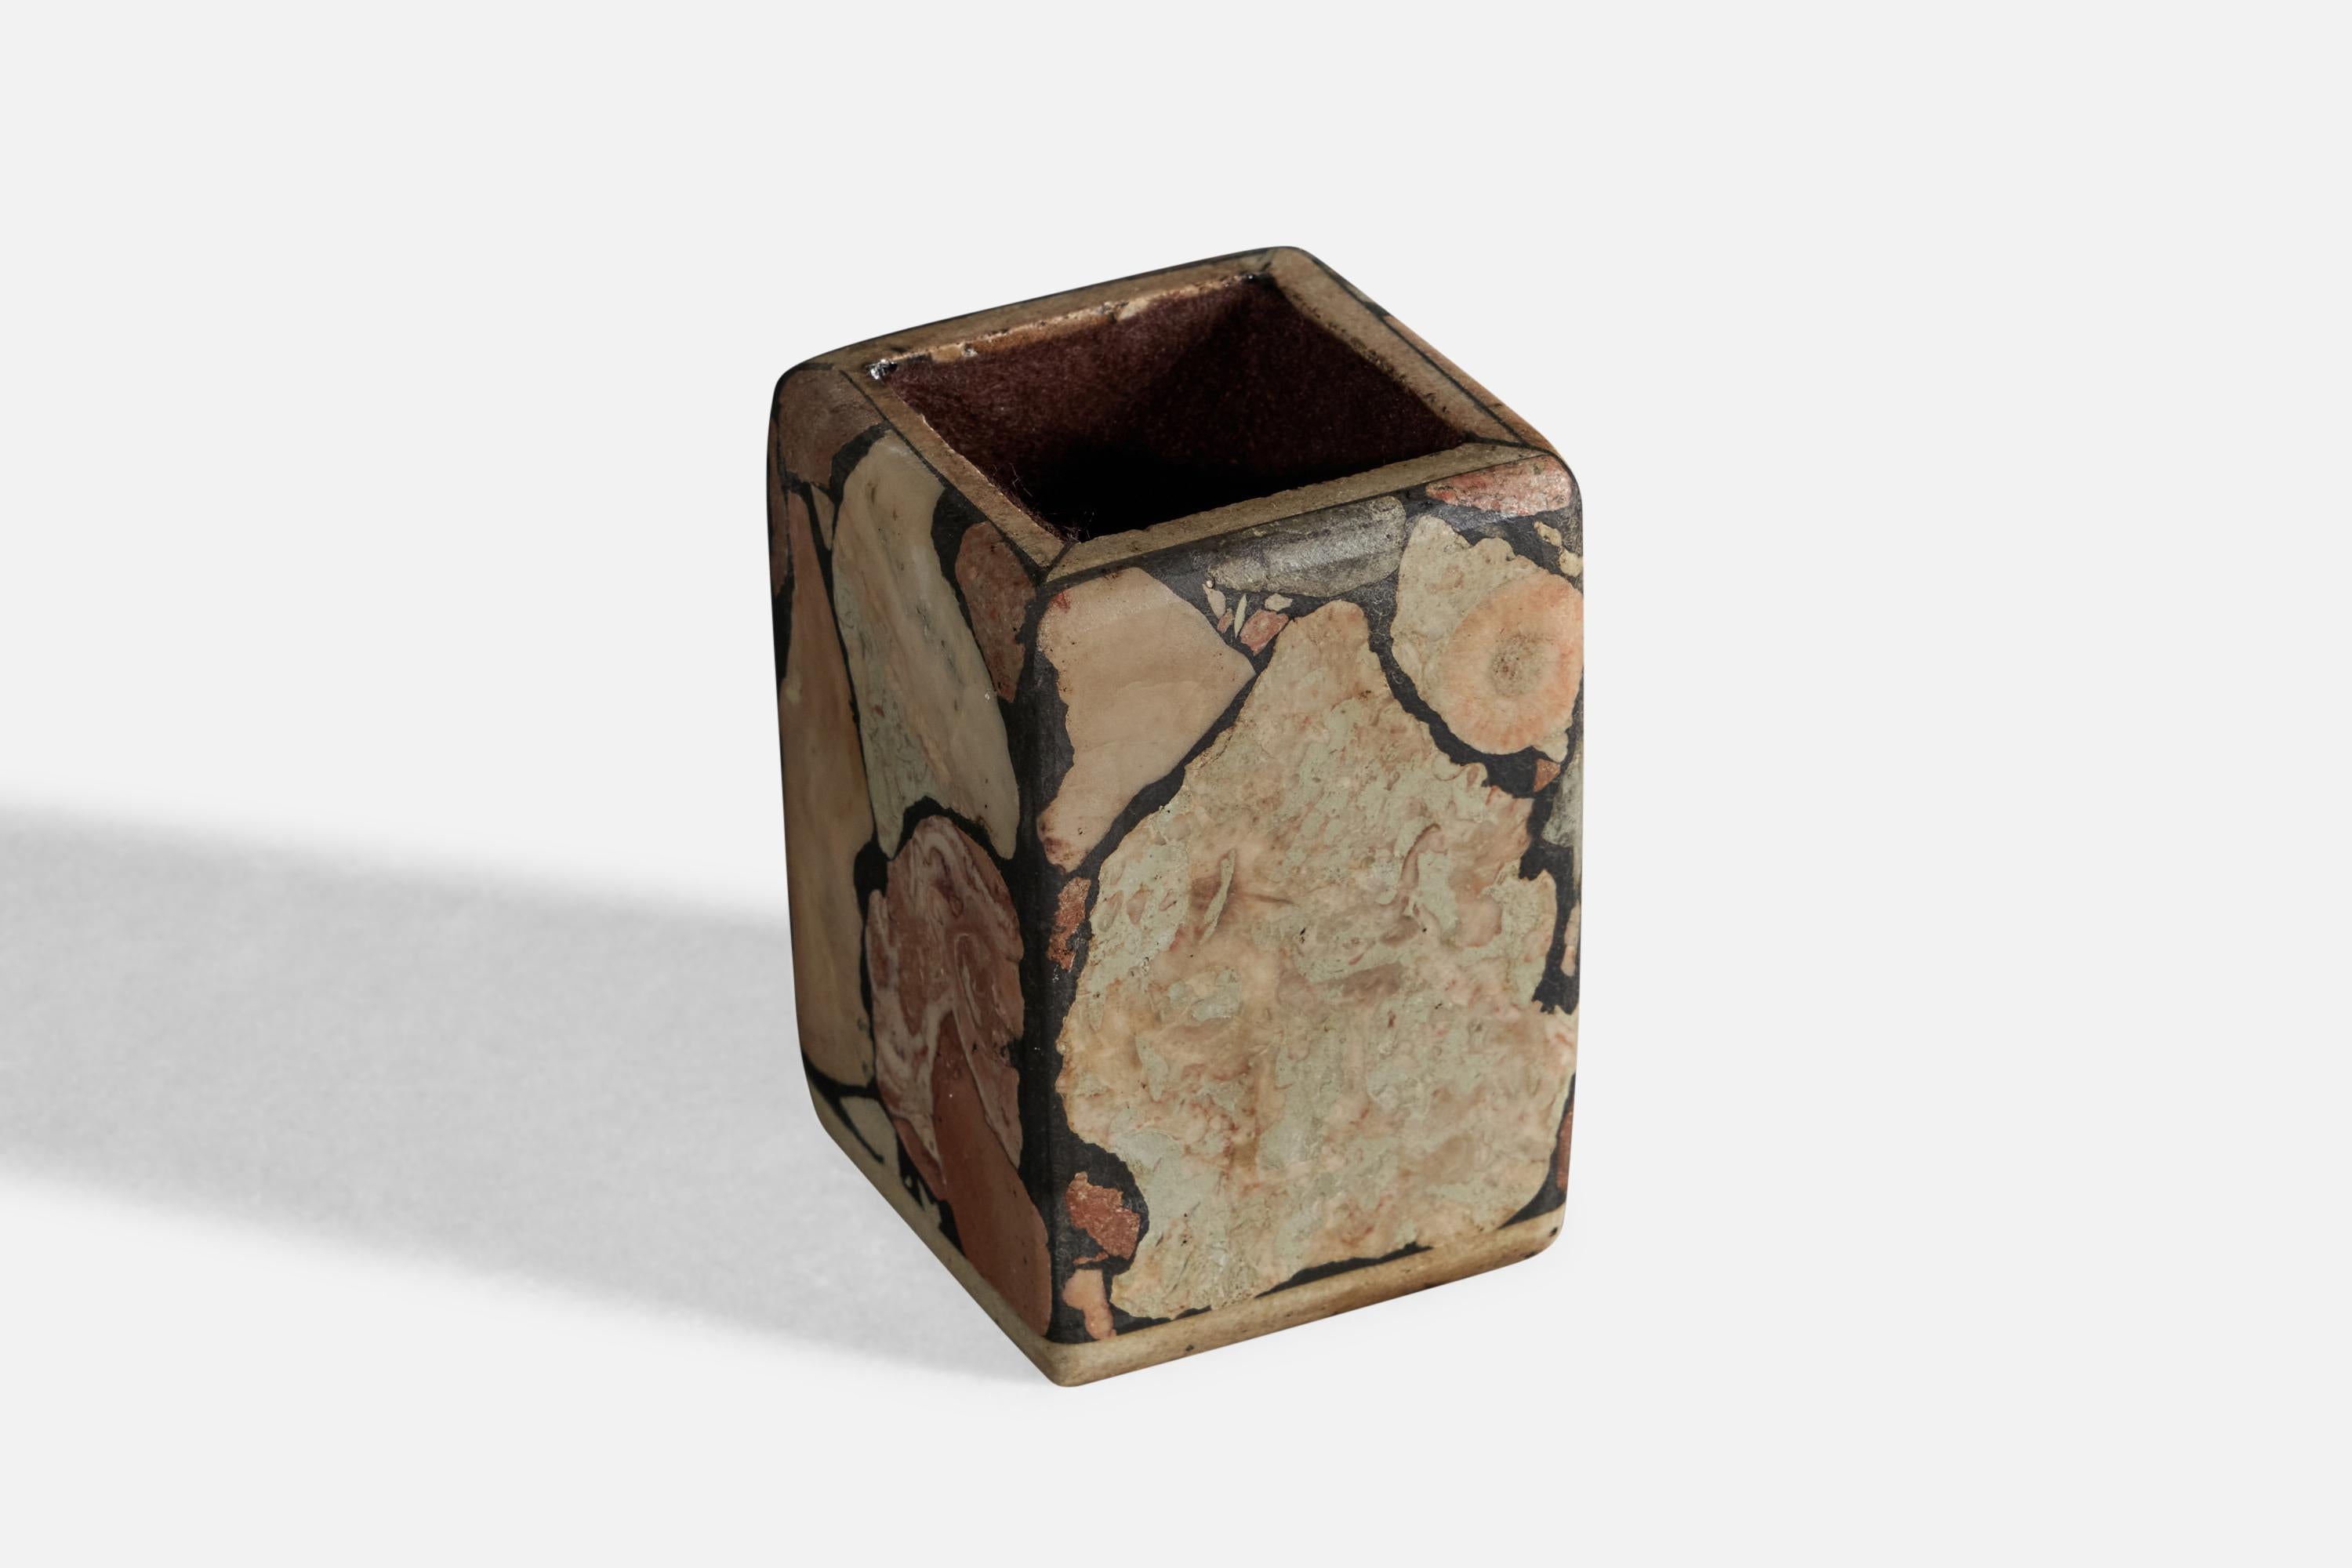 A fossil-stone vase, designed and produced in Gotland, Sweden, c. 1970s.